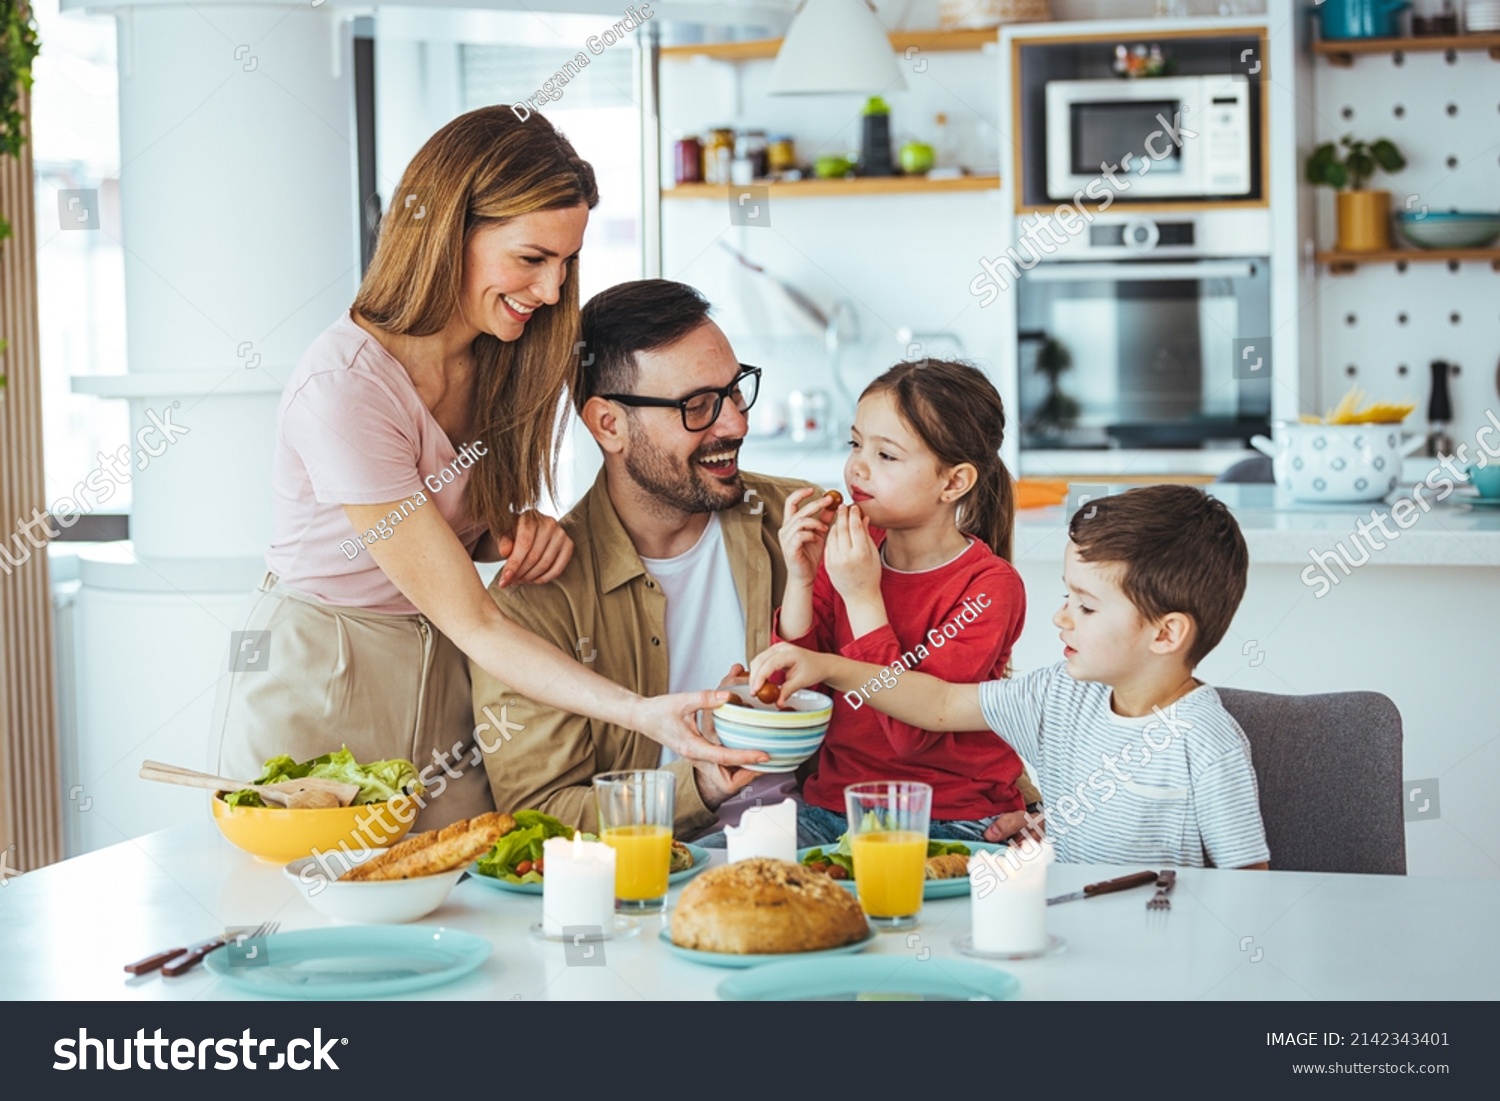 Family of four at the table, mother serves them breakfast. Everyone is happy and smiling, parents enjoy spending time with their children. A cheerful family has fun during a meal at the dining table. #2142343401